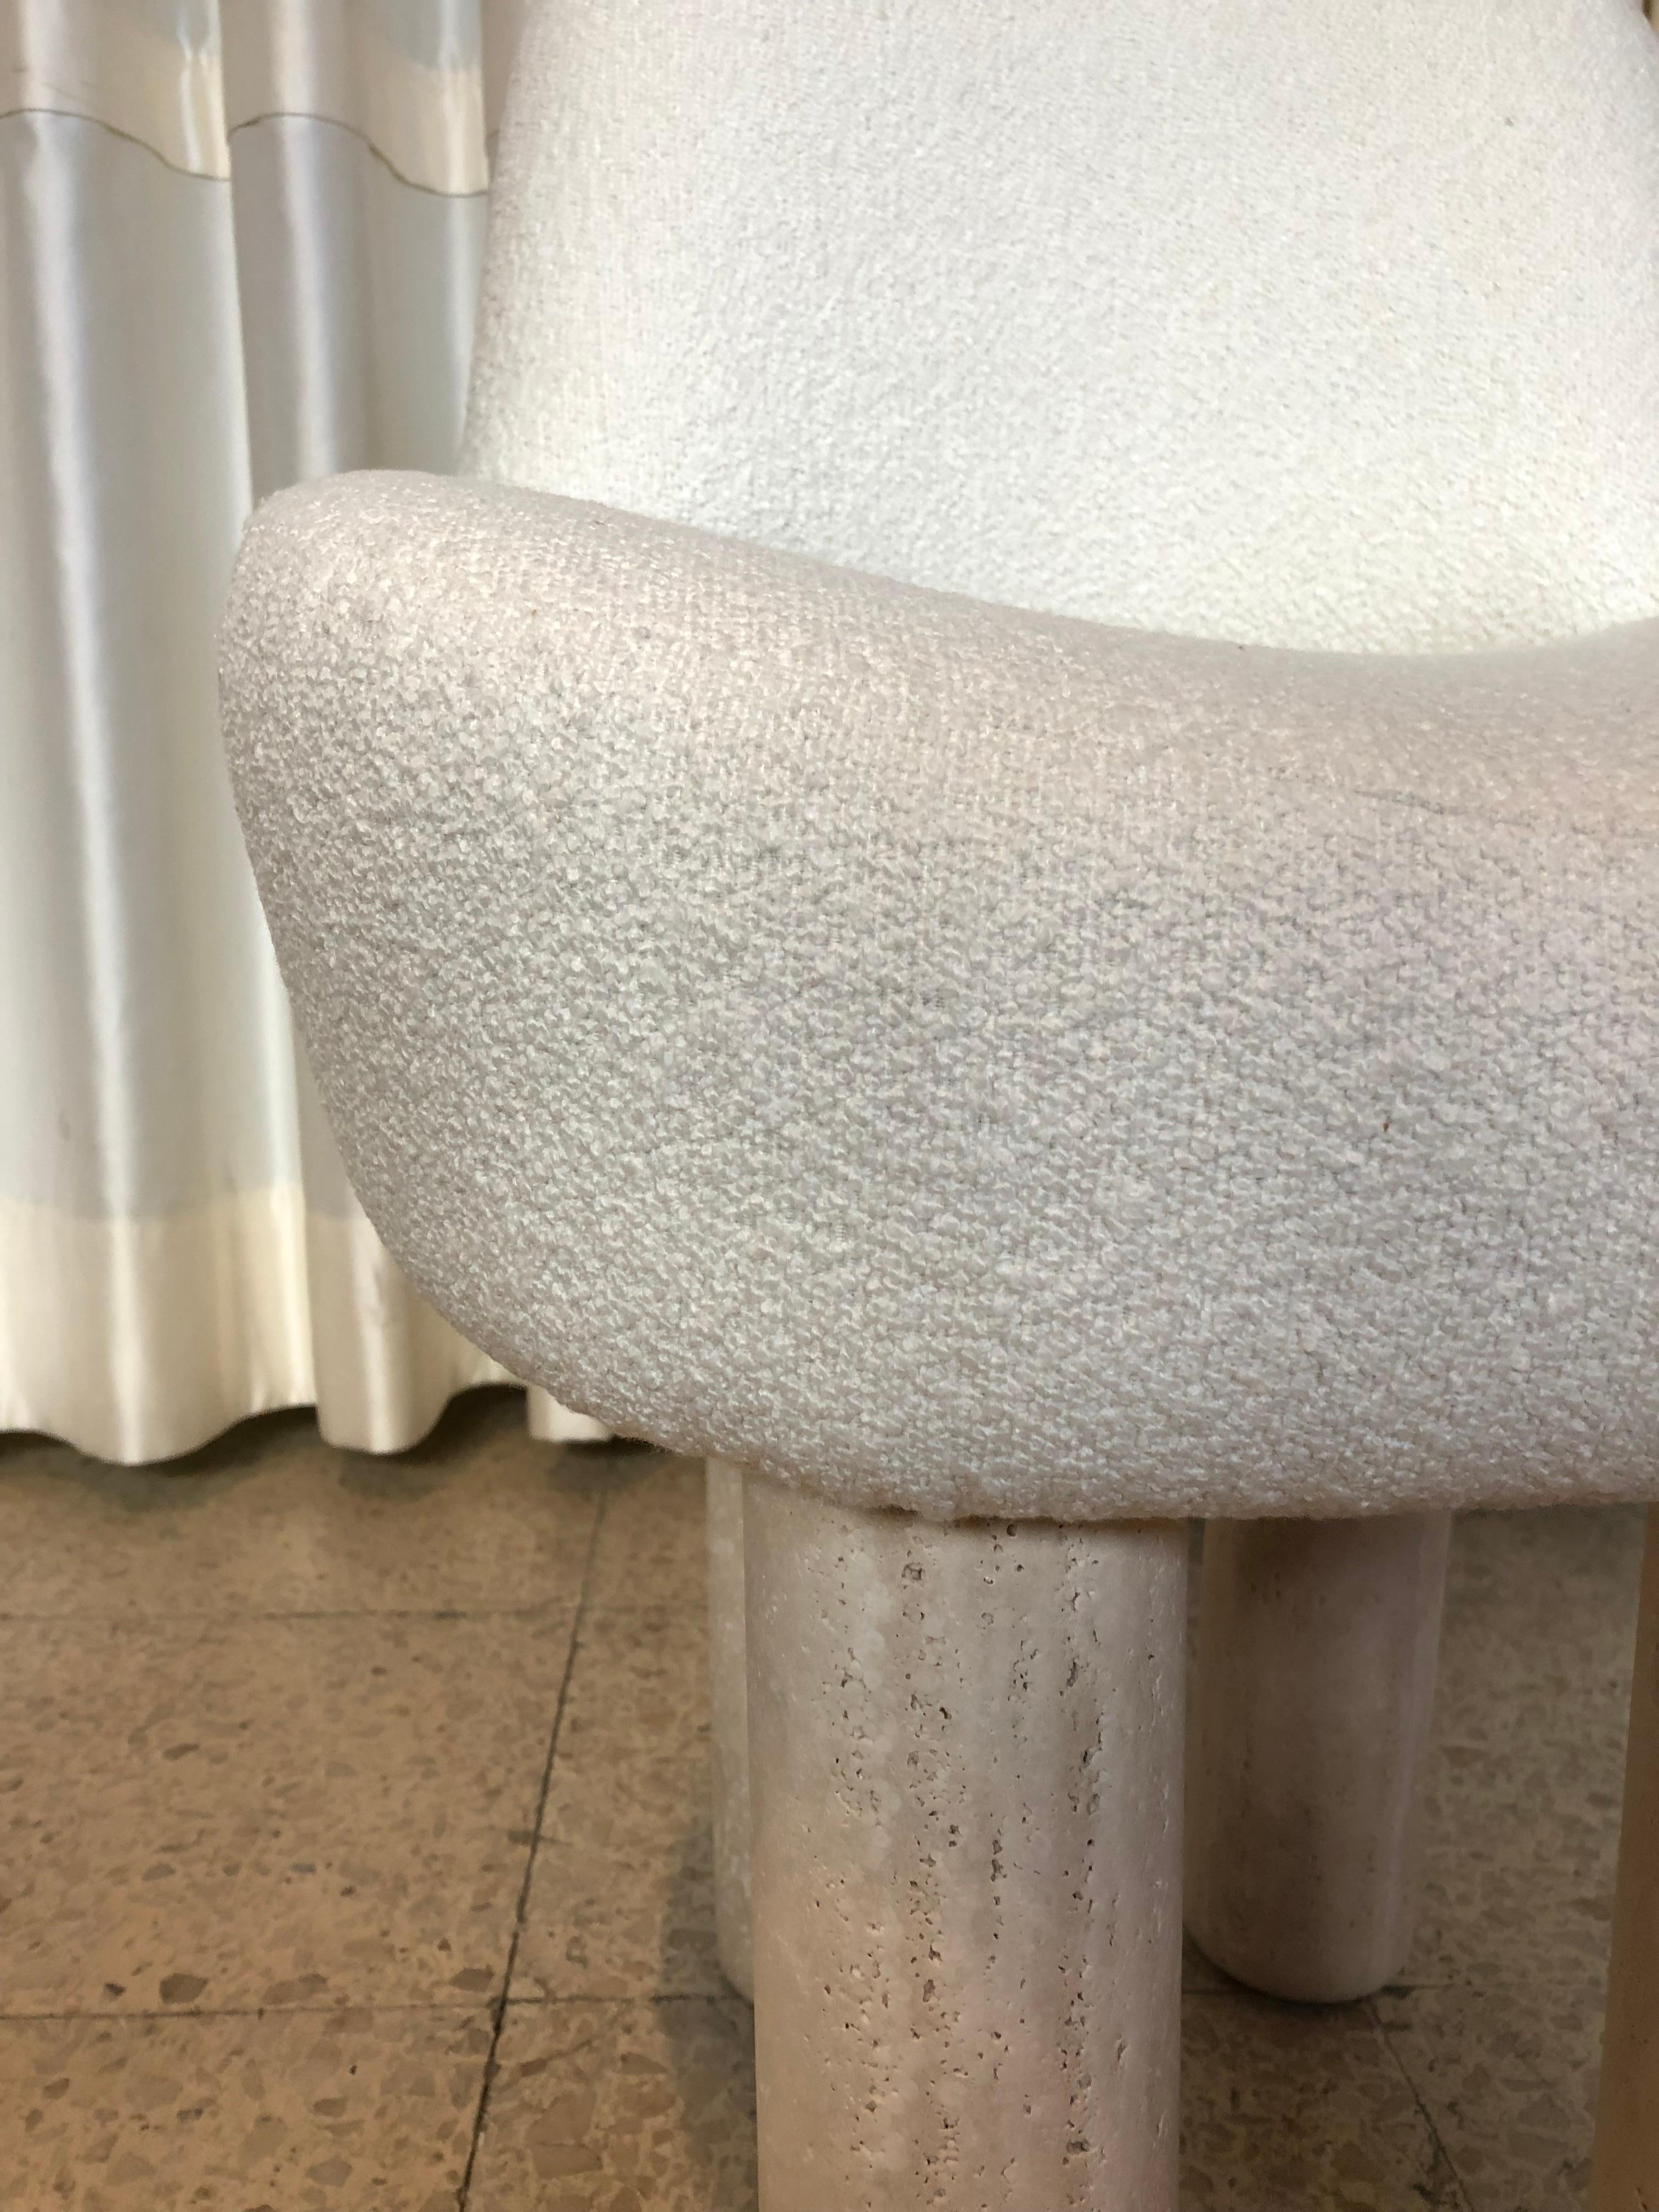 Contemporary Modern Hygge Chair: Boucle Fabric & Travertino Marble by Saccal Design House by Collector Studio

The Hygge Collection is inspired by contemporary architecture in Portugal that Speaks of its Romanesque past by honoring the antiques